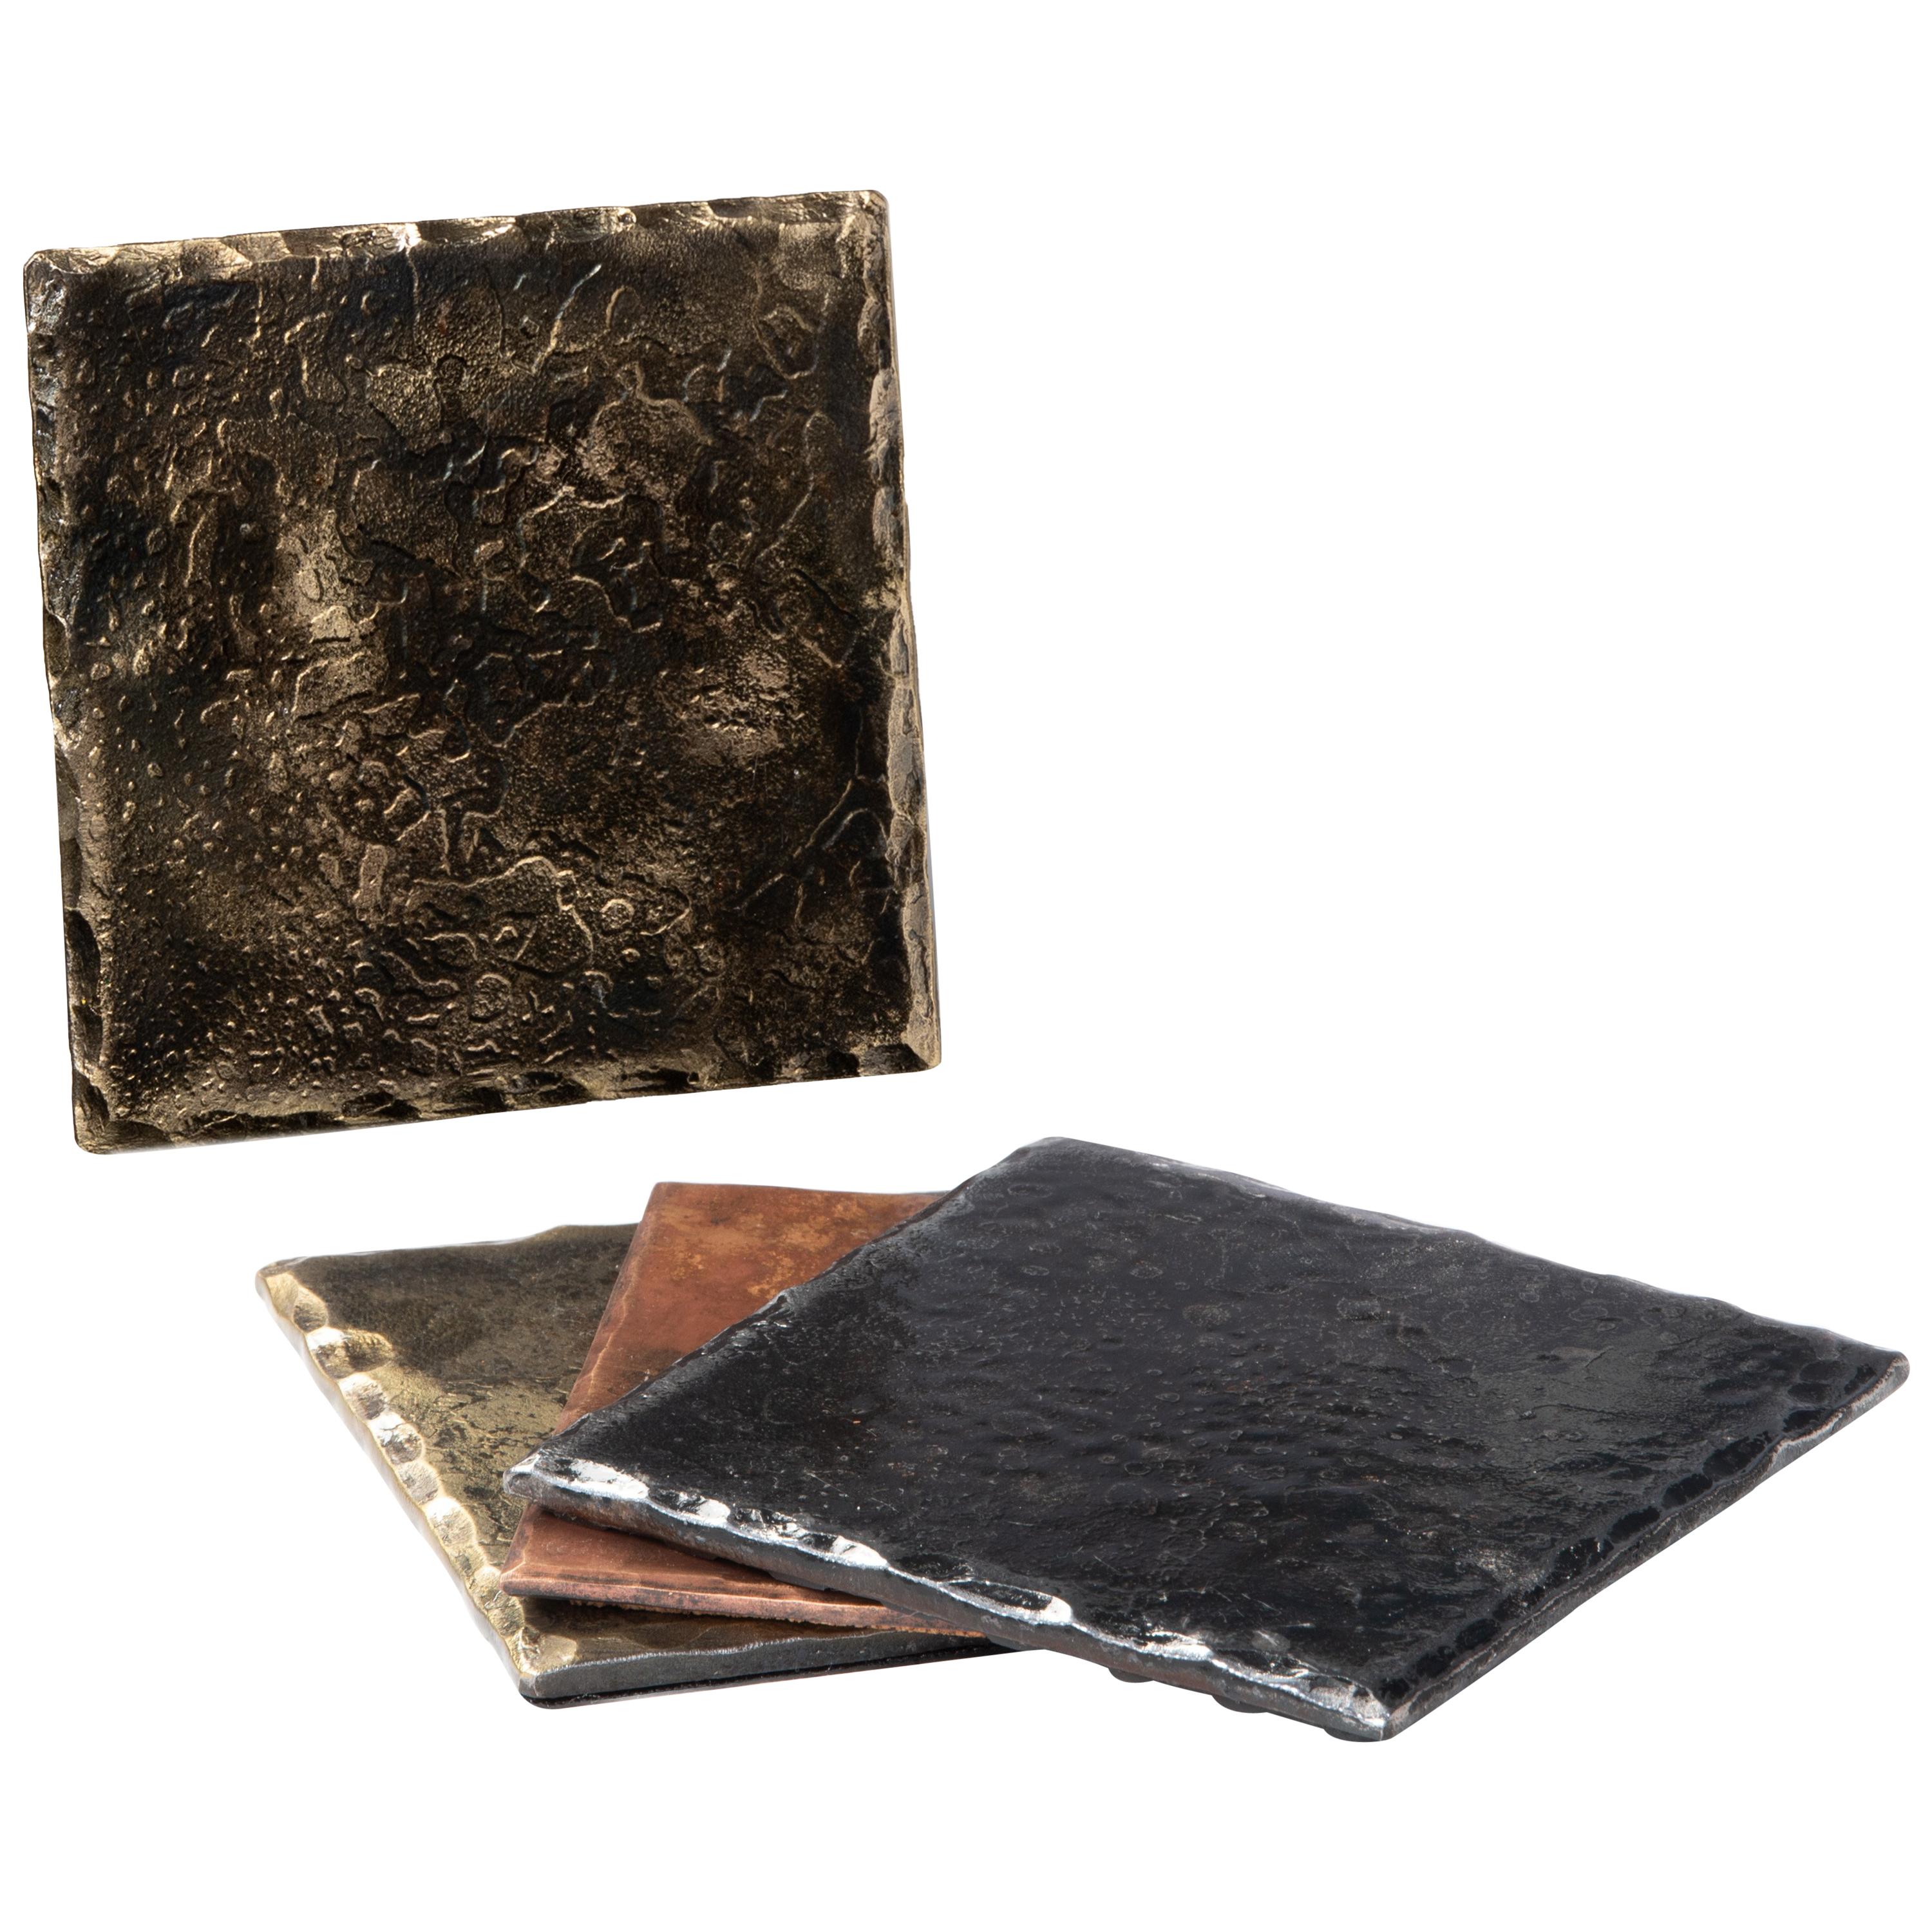 A handcrafted, steel square coaster with hammered, beveled edges. Brass highlights result in lighter gold tone that contrasts with the forge blackened steel. Wire brushed and sanded to accentuate the forged details. A glossy clear coat enhances the